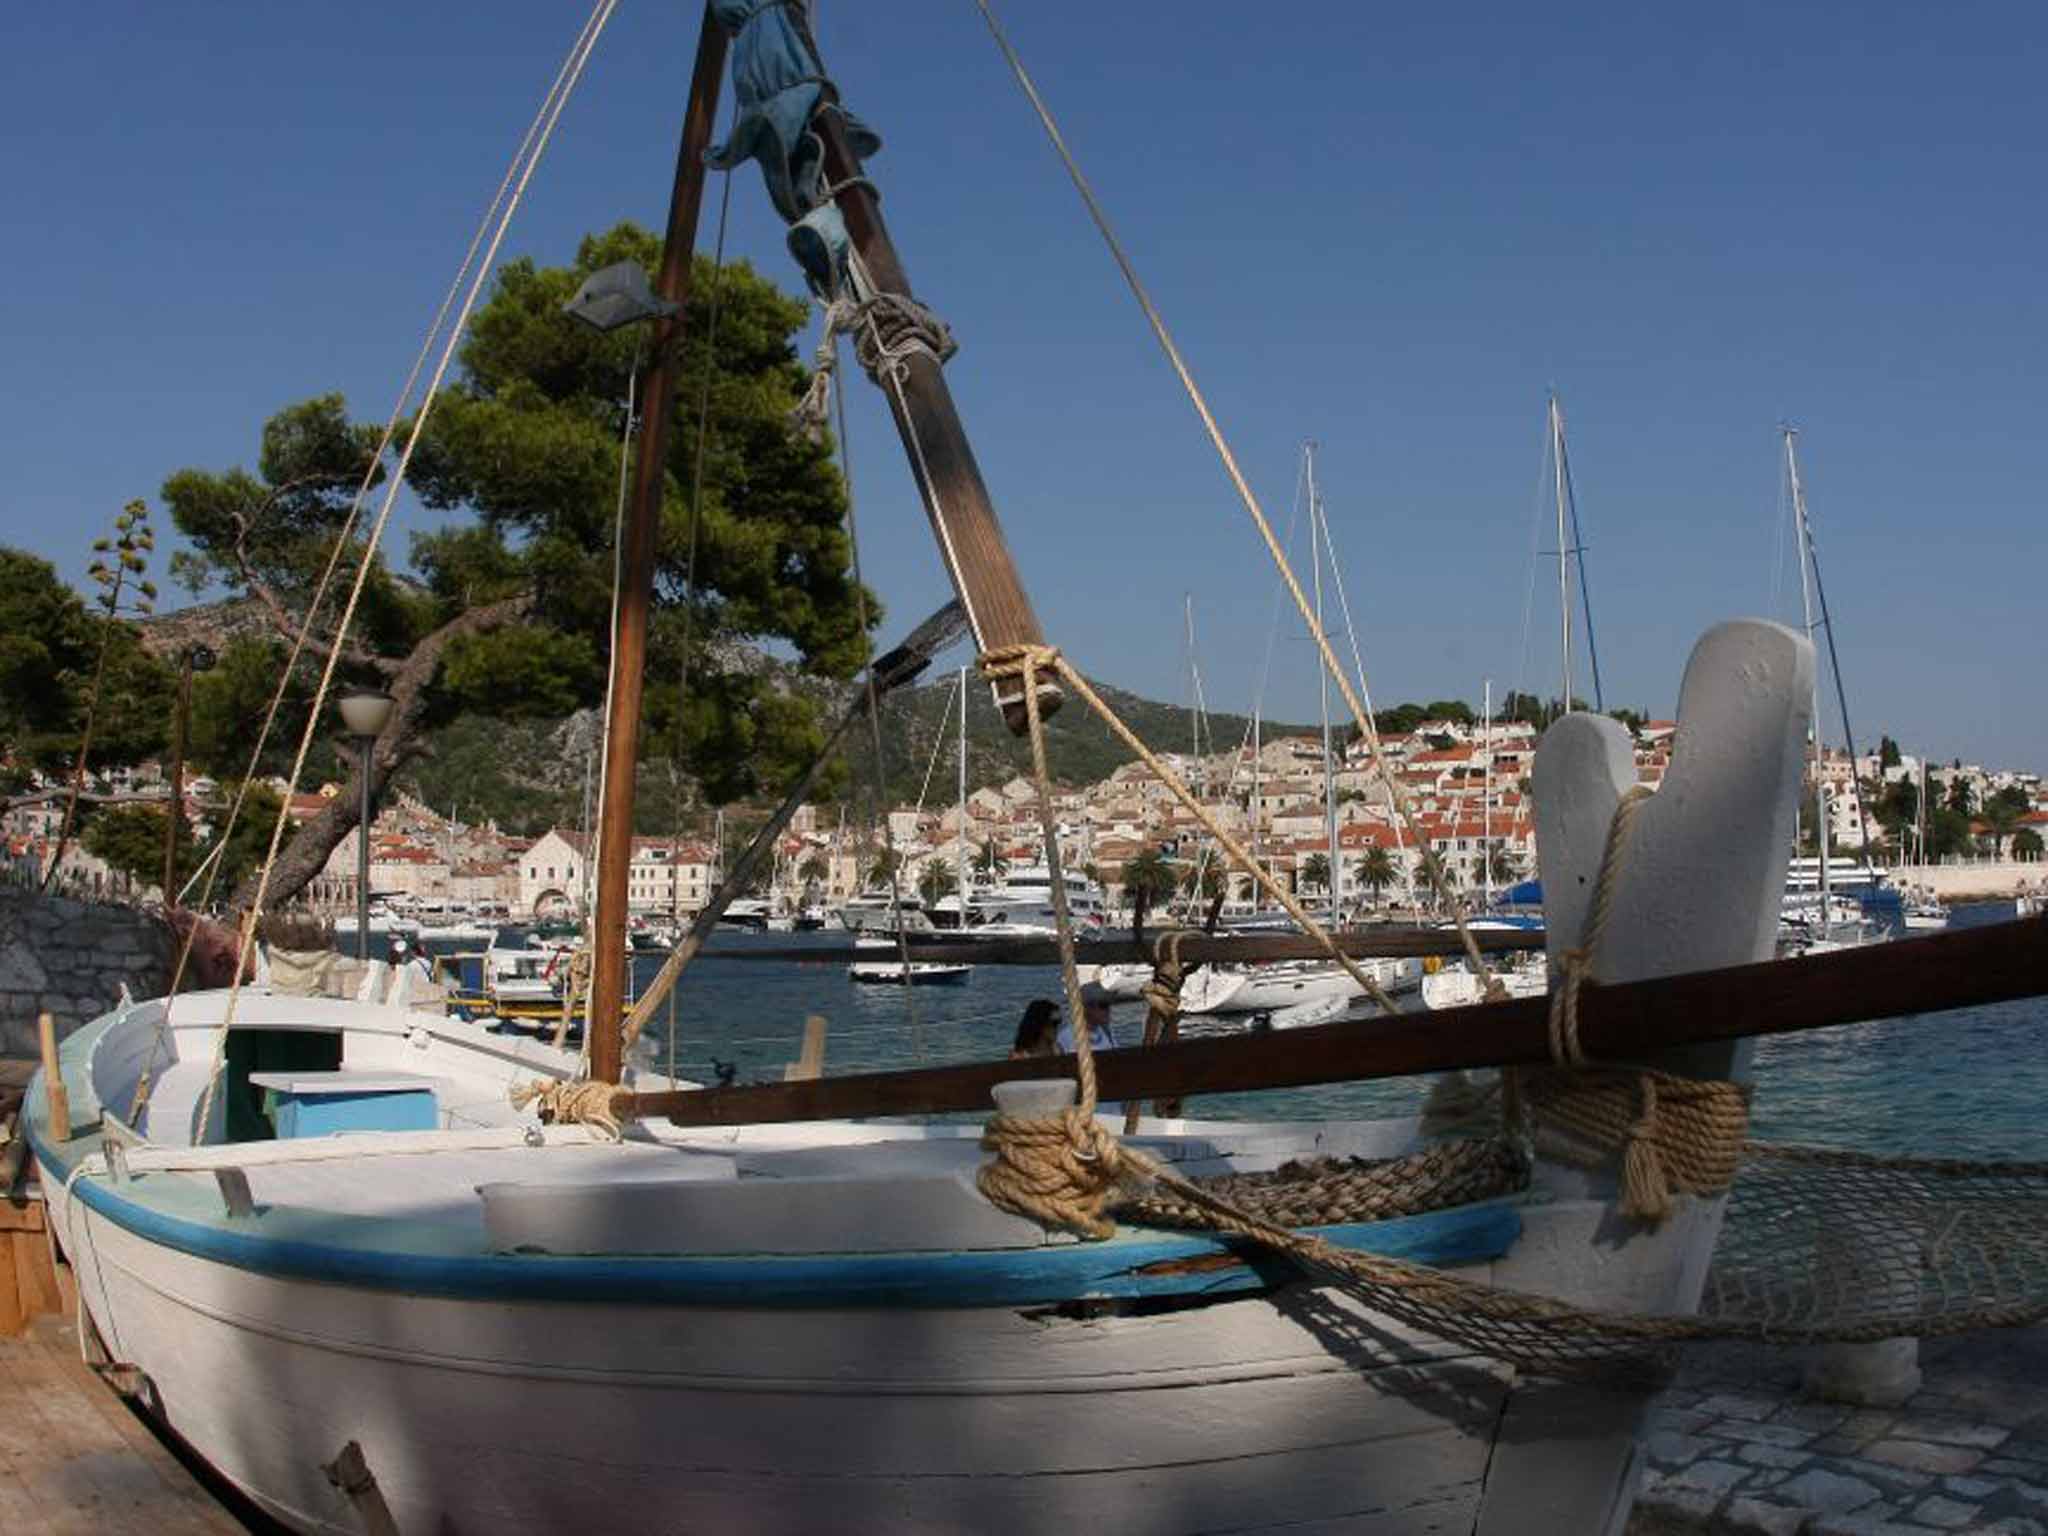 Hvar: this exclusive island makes for a glamorous stop